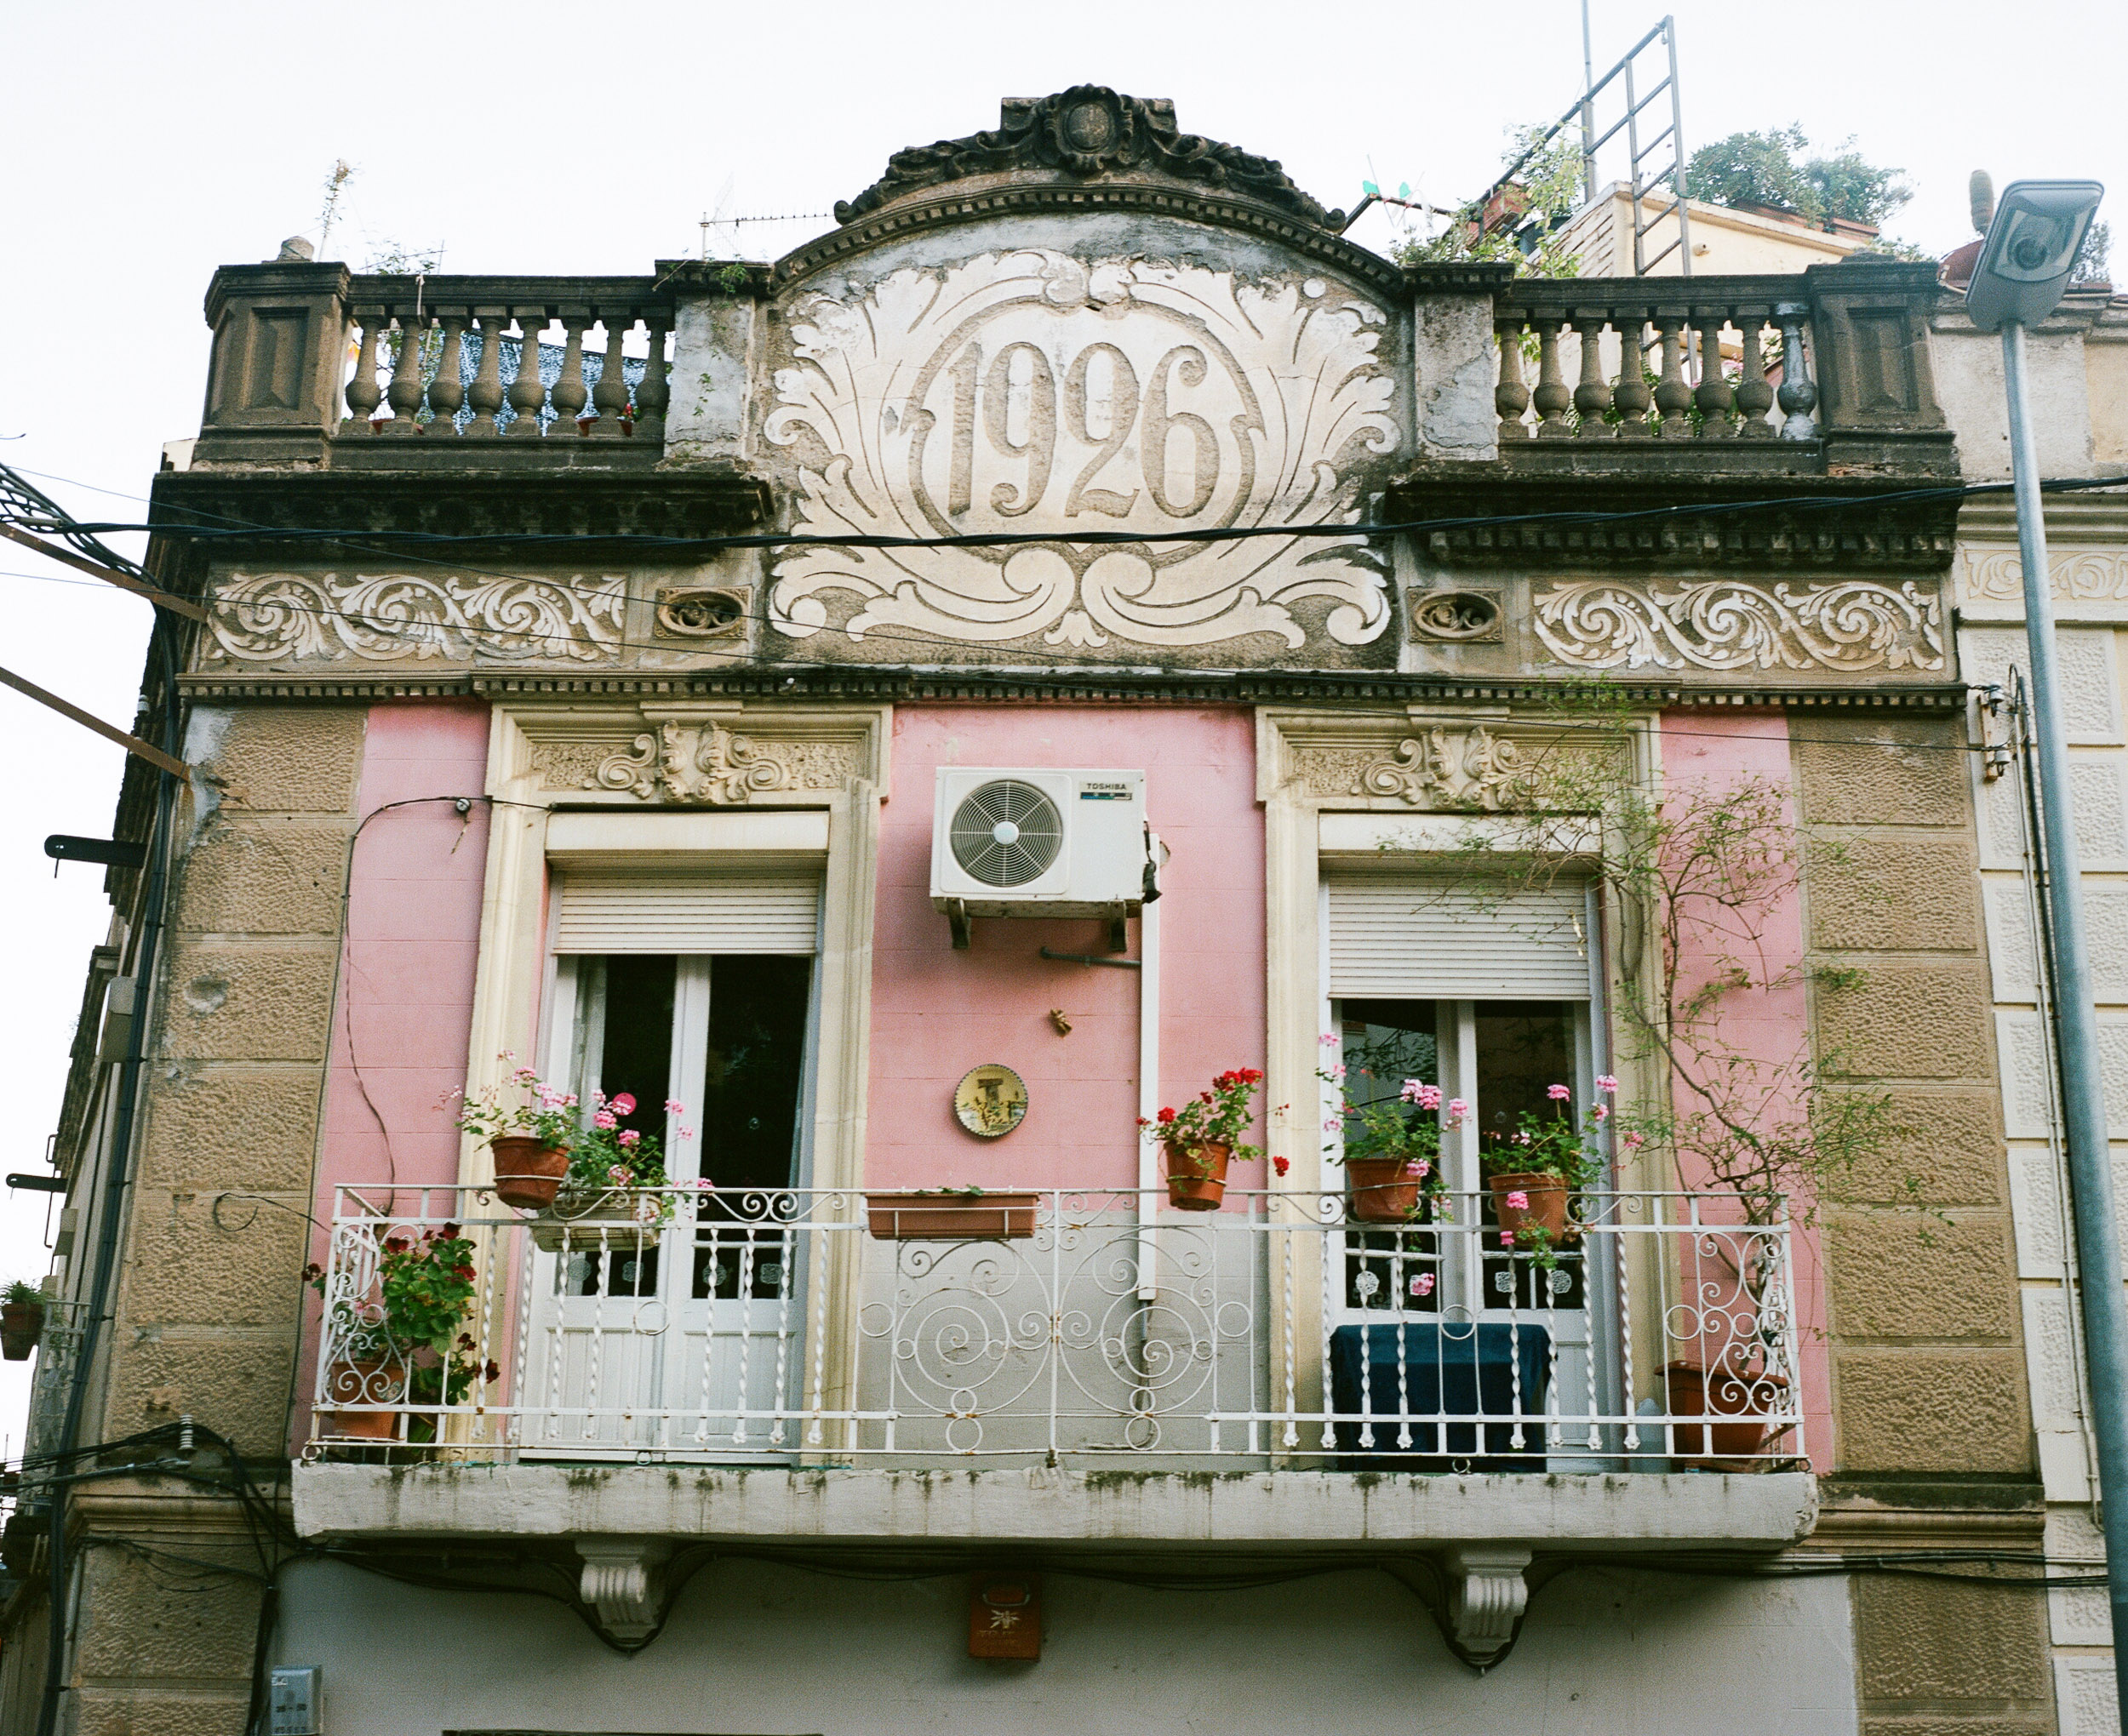 Pink house with balcony and an airconditioner, numbered 1926, in Barcelona, Spain